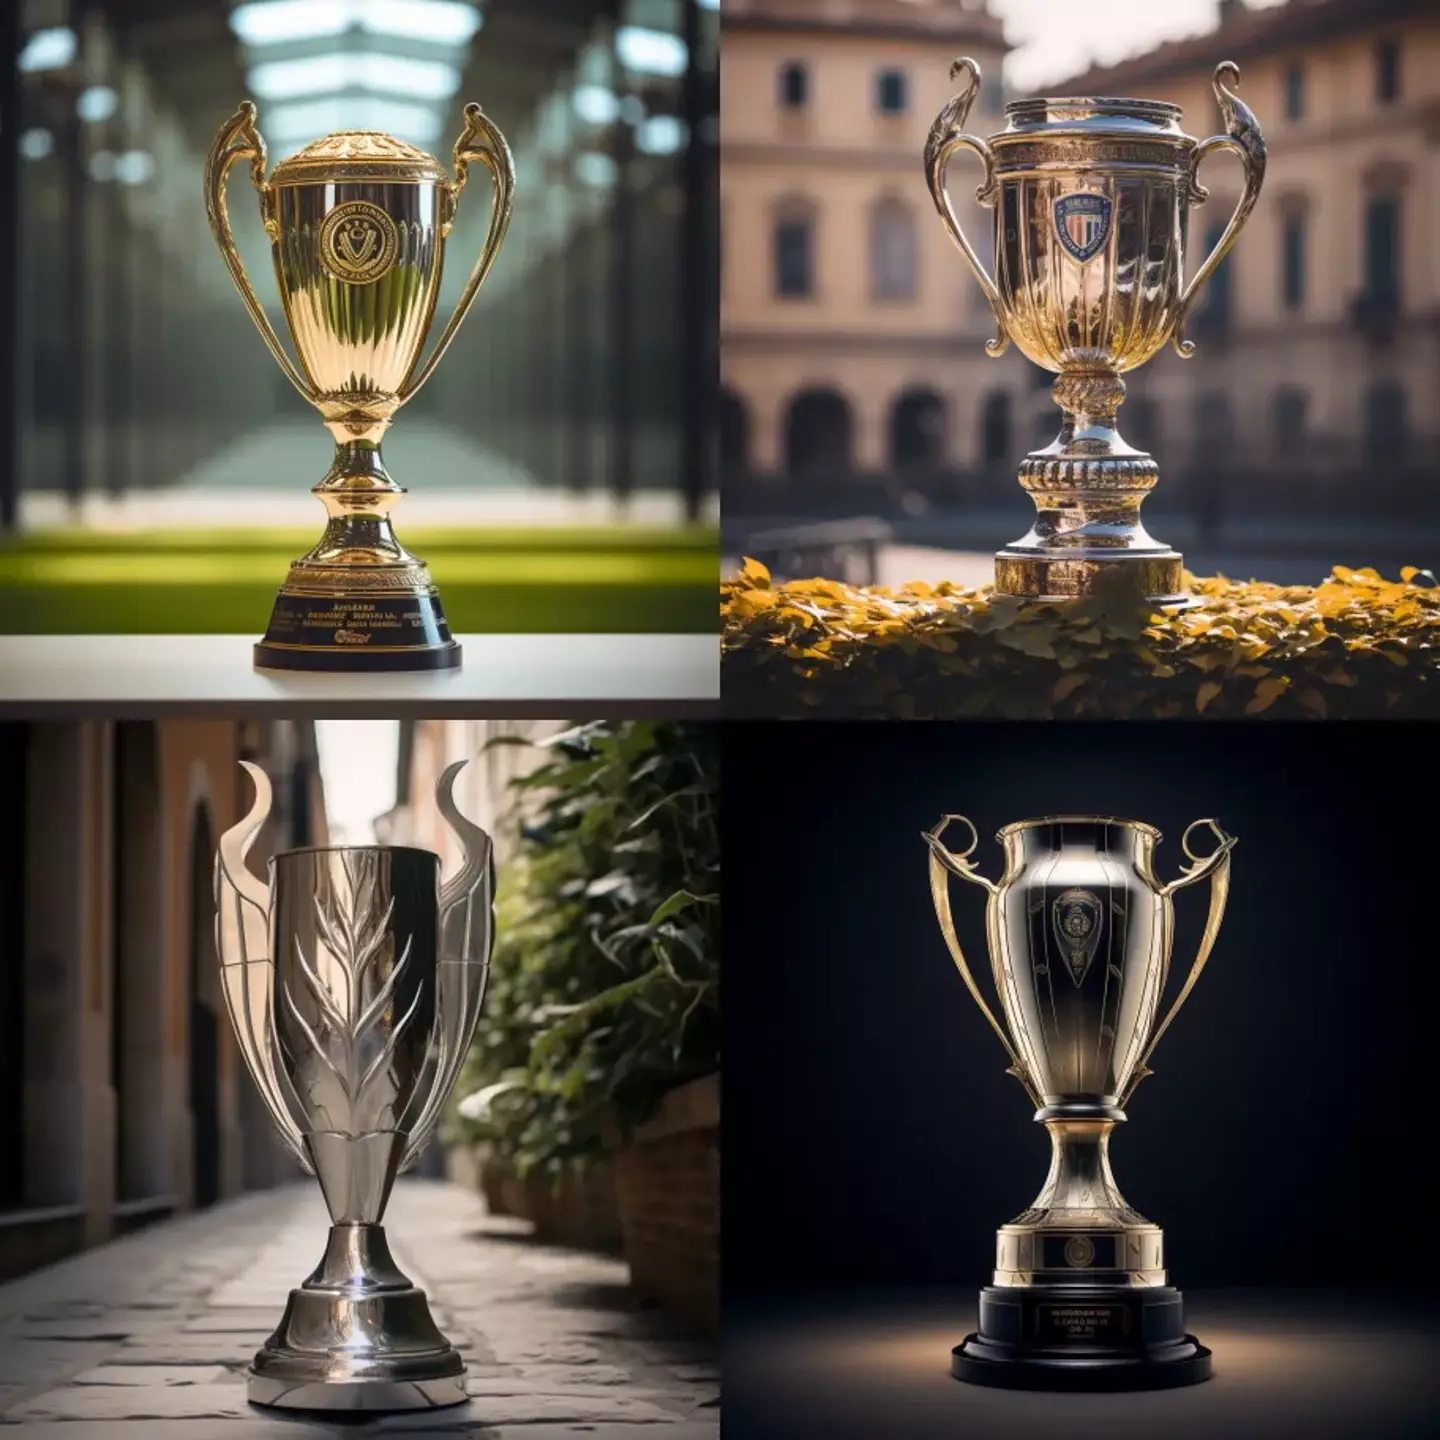 A depiction of how Serie A's trophy could look in the future.